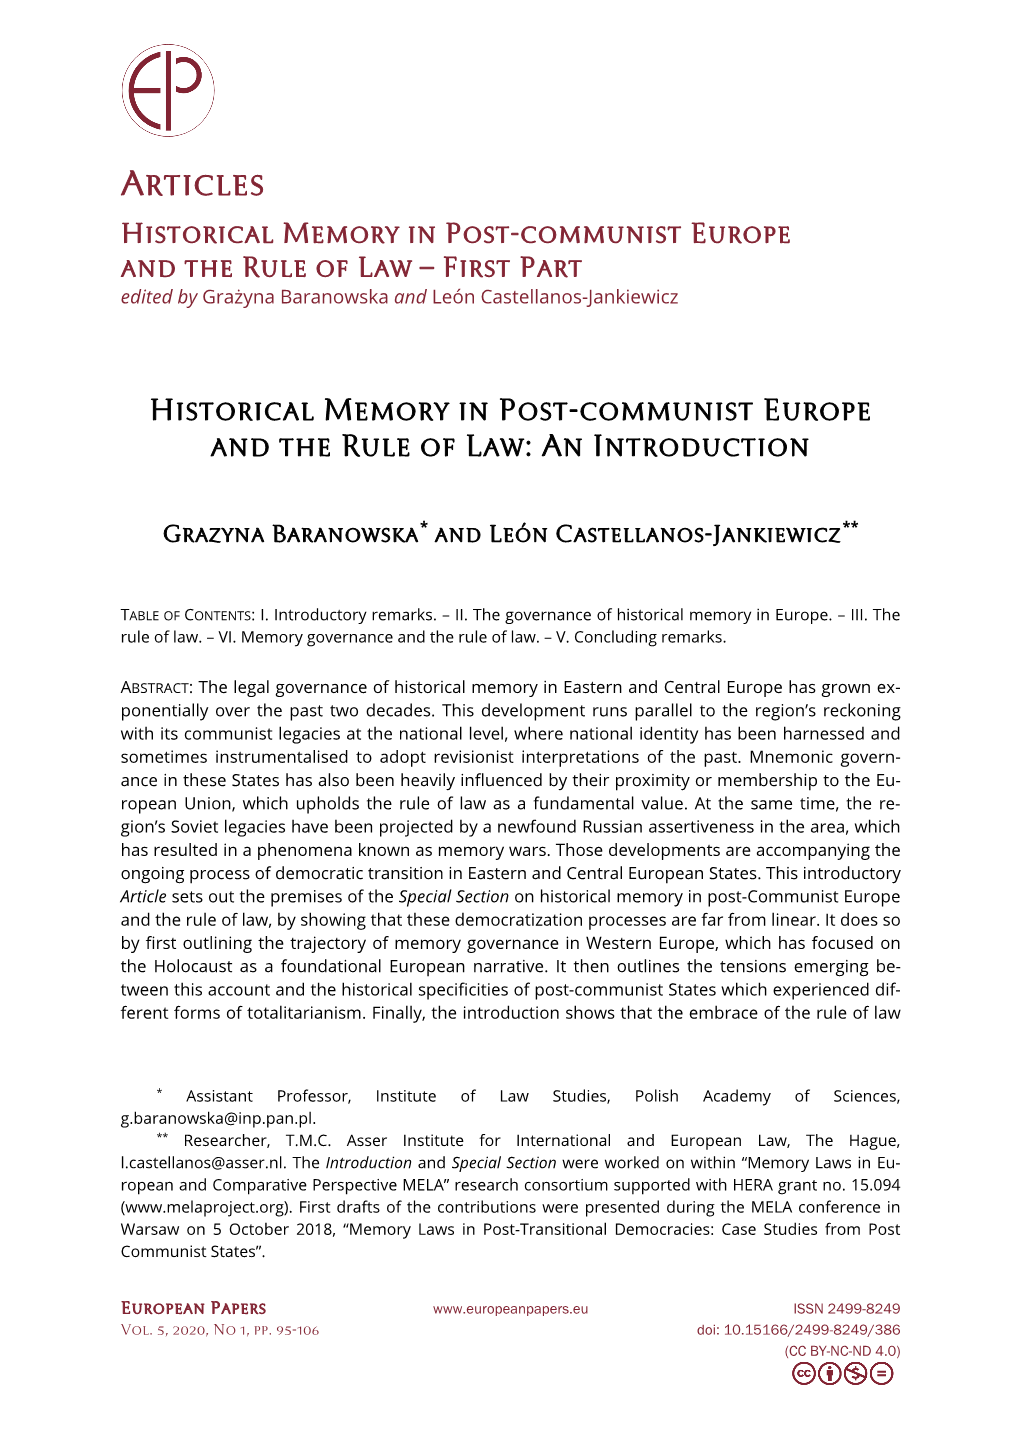 Historical Memory in Post-Communist Europe and the Rule of Law – First Part Edited by Grażyna Baranowska and León Castellanos-Jankiewicz